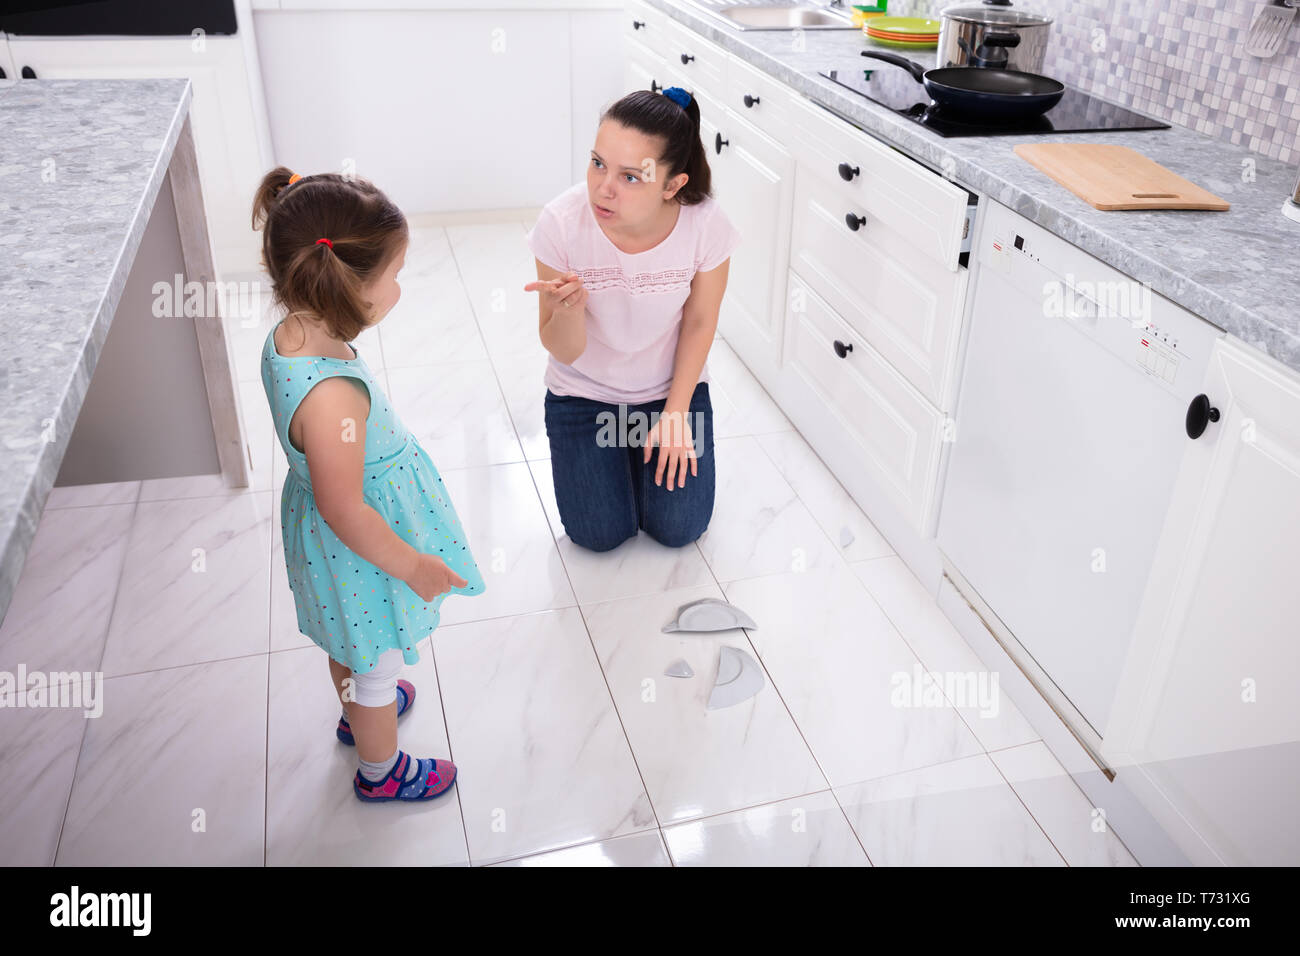 Mother Shouting To Her Daughter While Broken The Plate Stock Photo